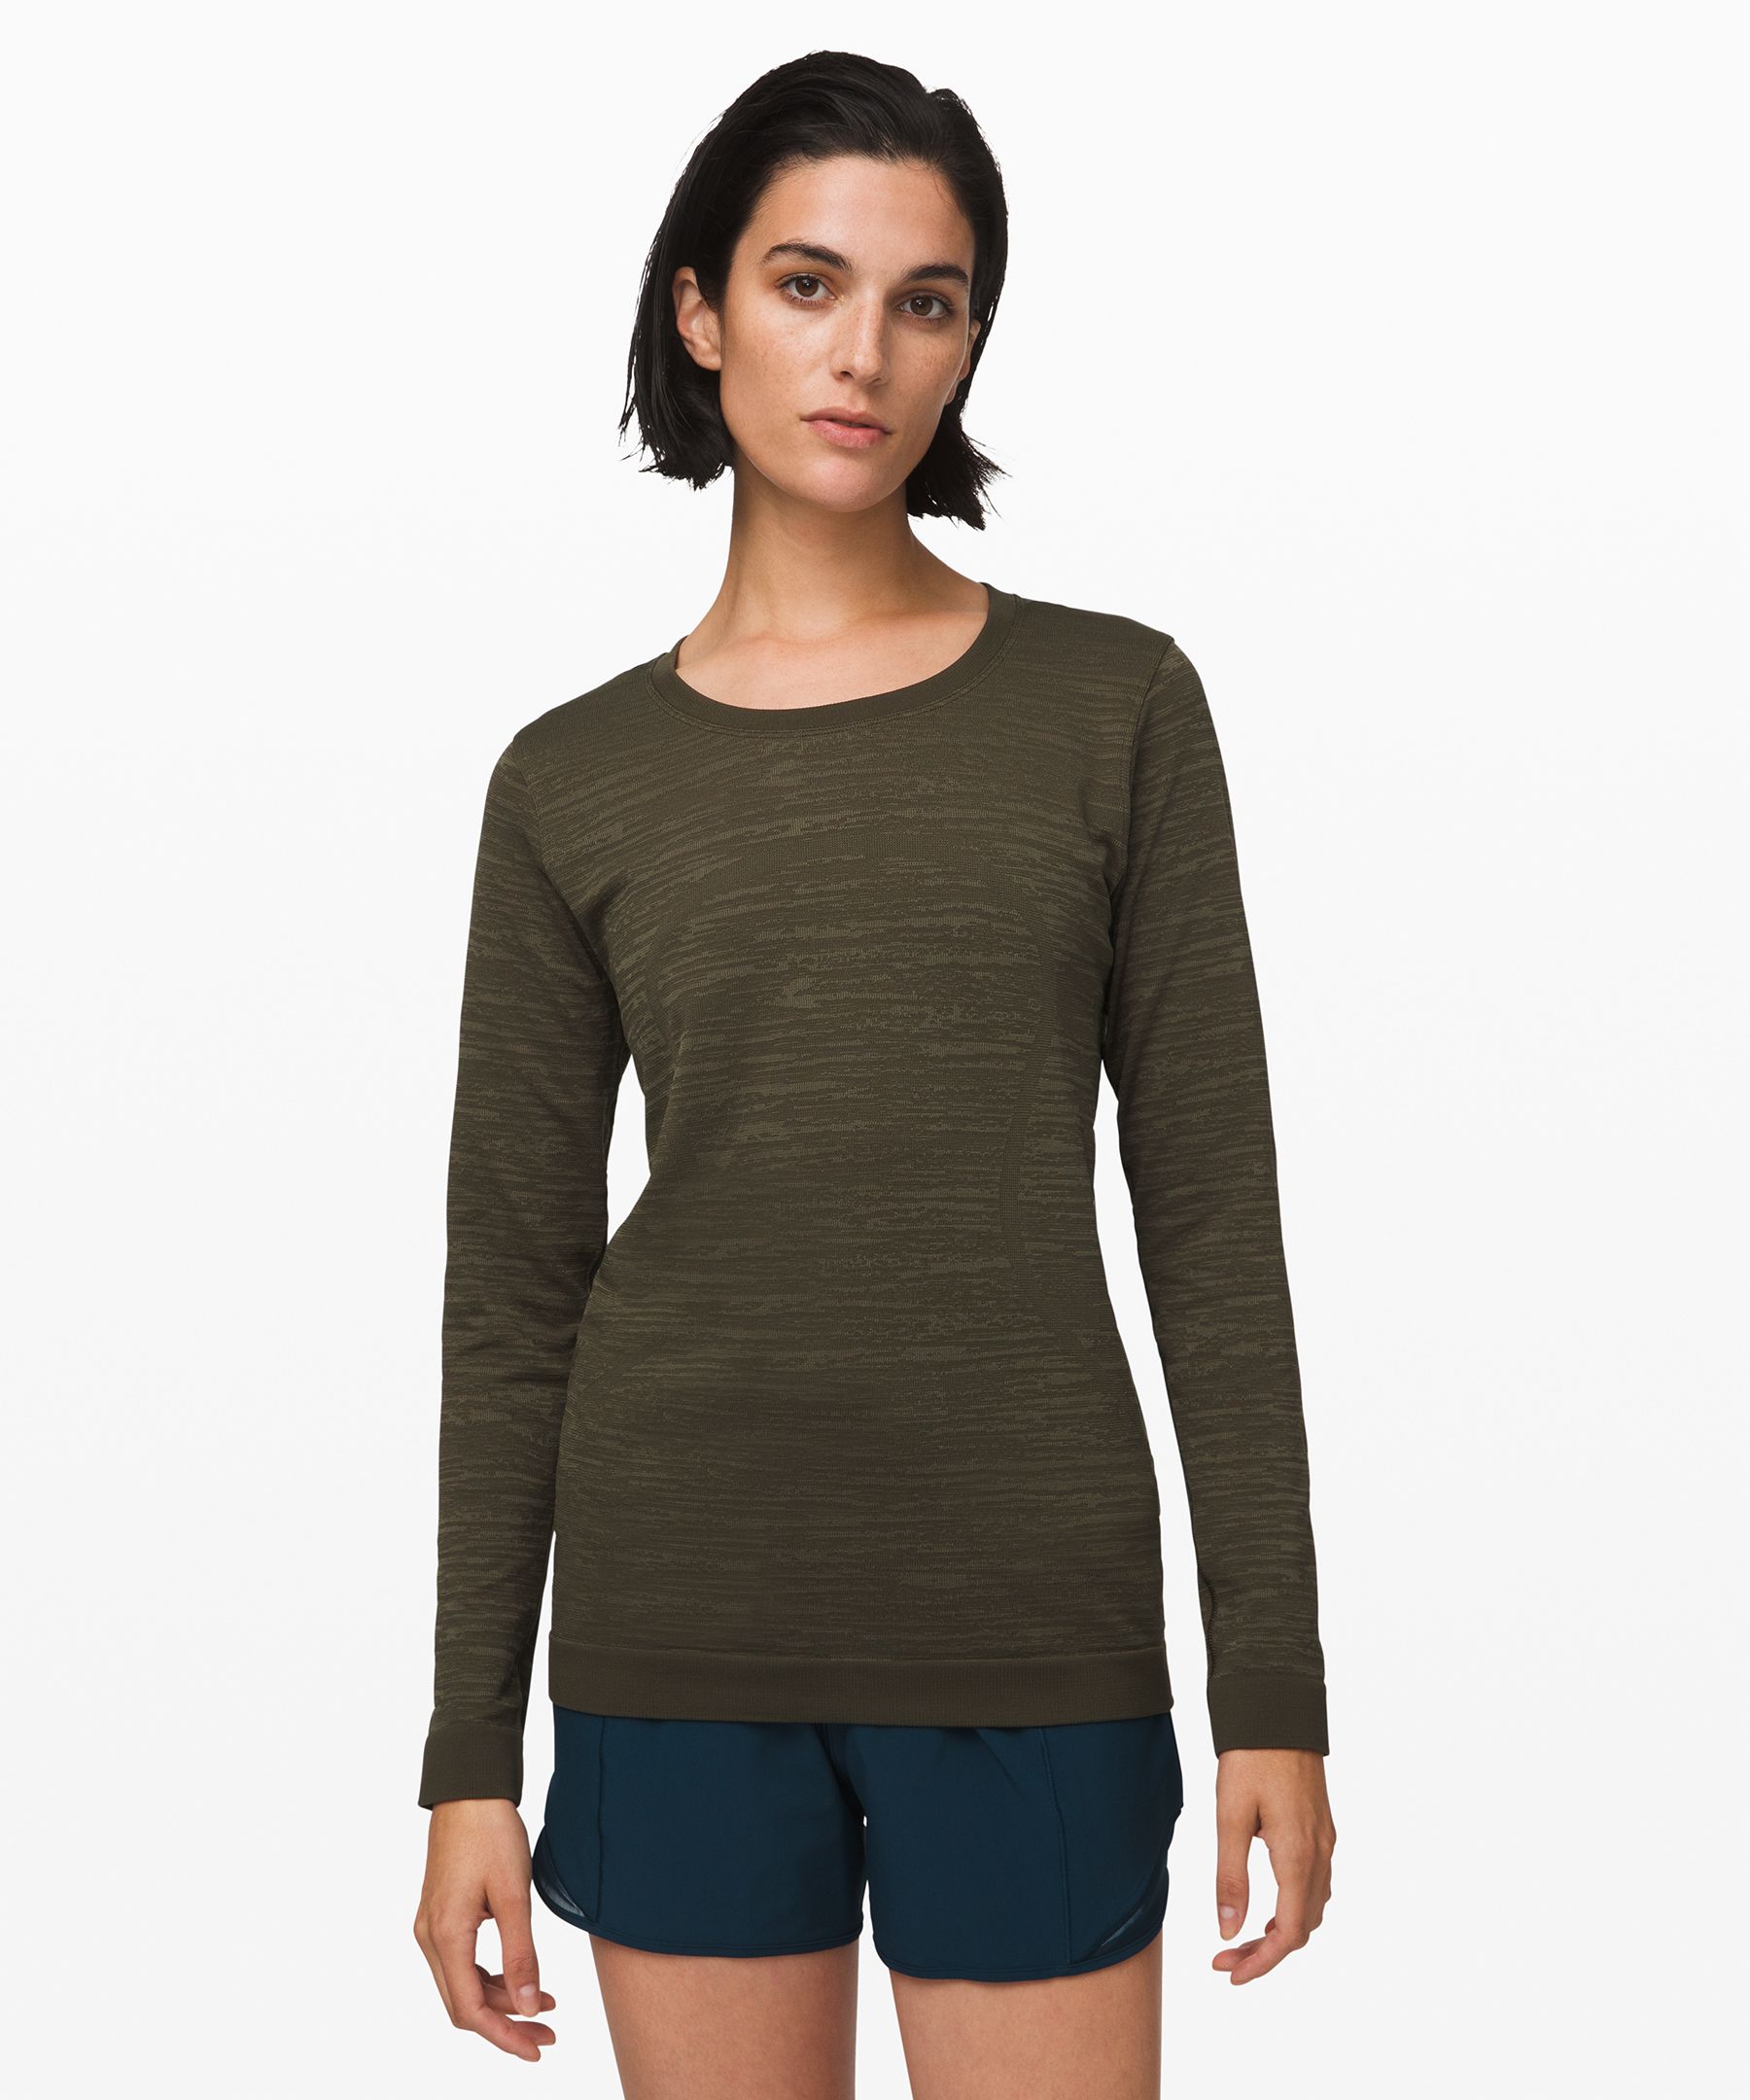 Lululemon Swiftly Relaxed Long Sleeve In Dark Olive/fatigue Green